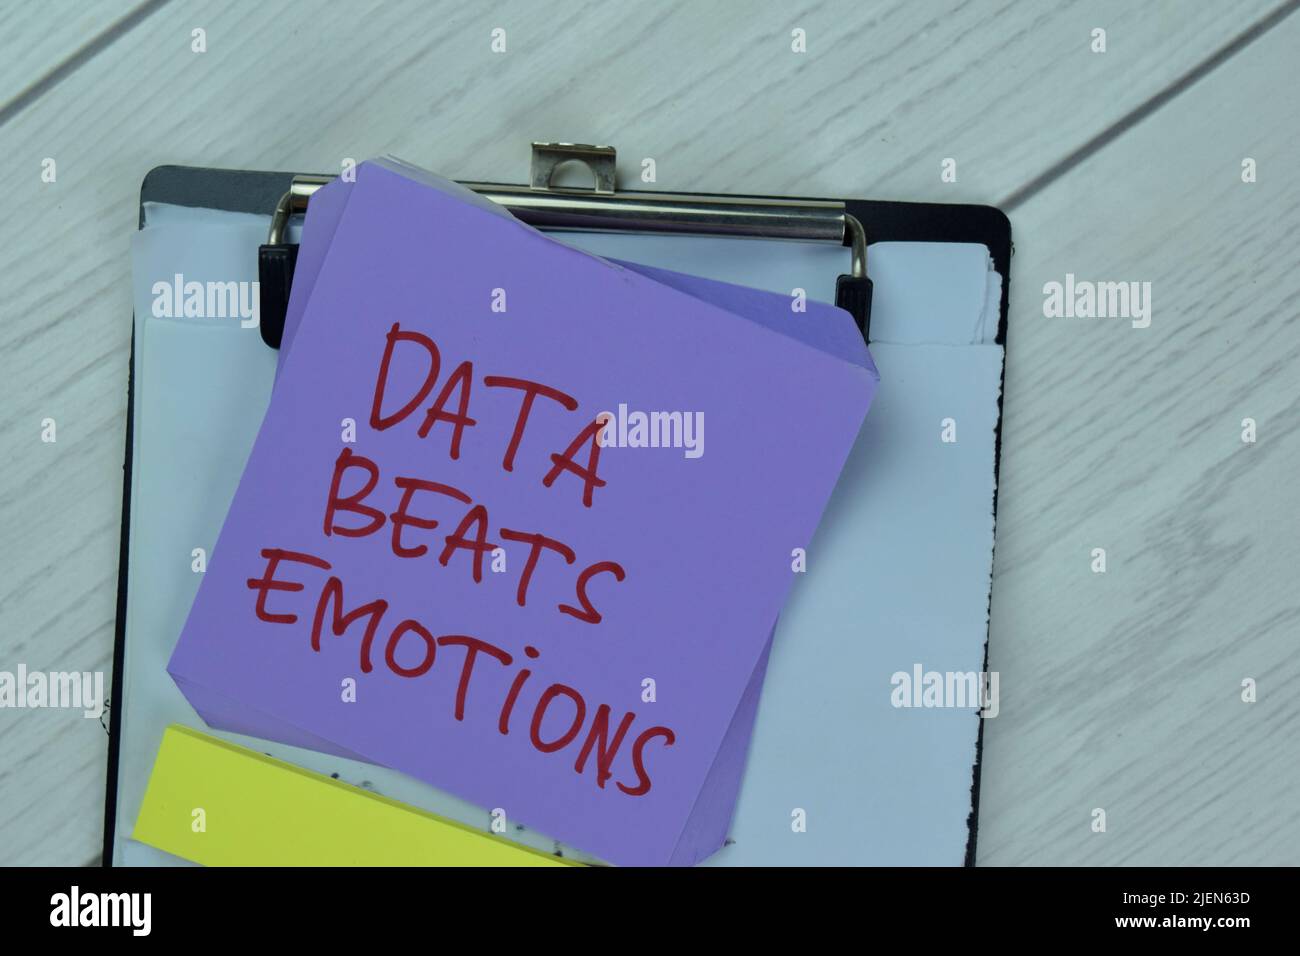 Concept of Data Beats Emotions write on sticky notes isolated on Wooden Table. Stock Photo